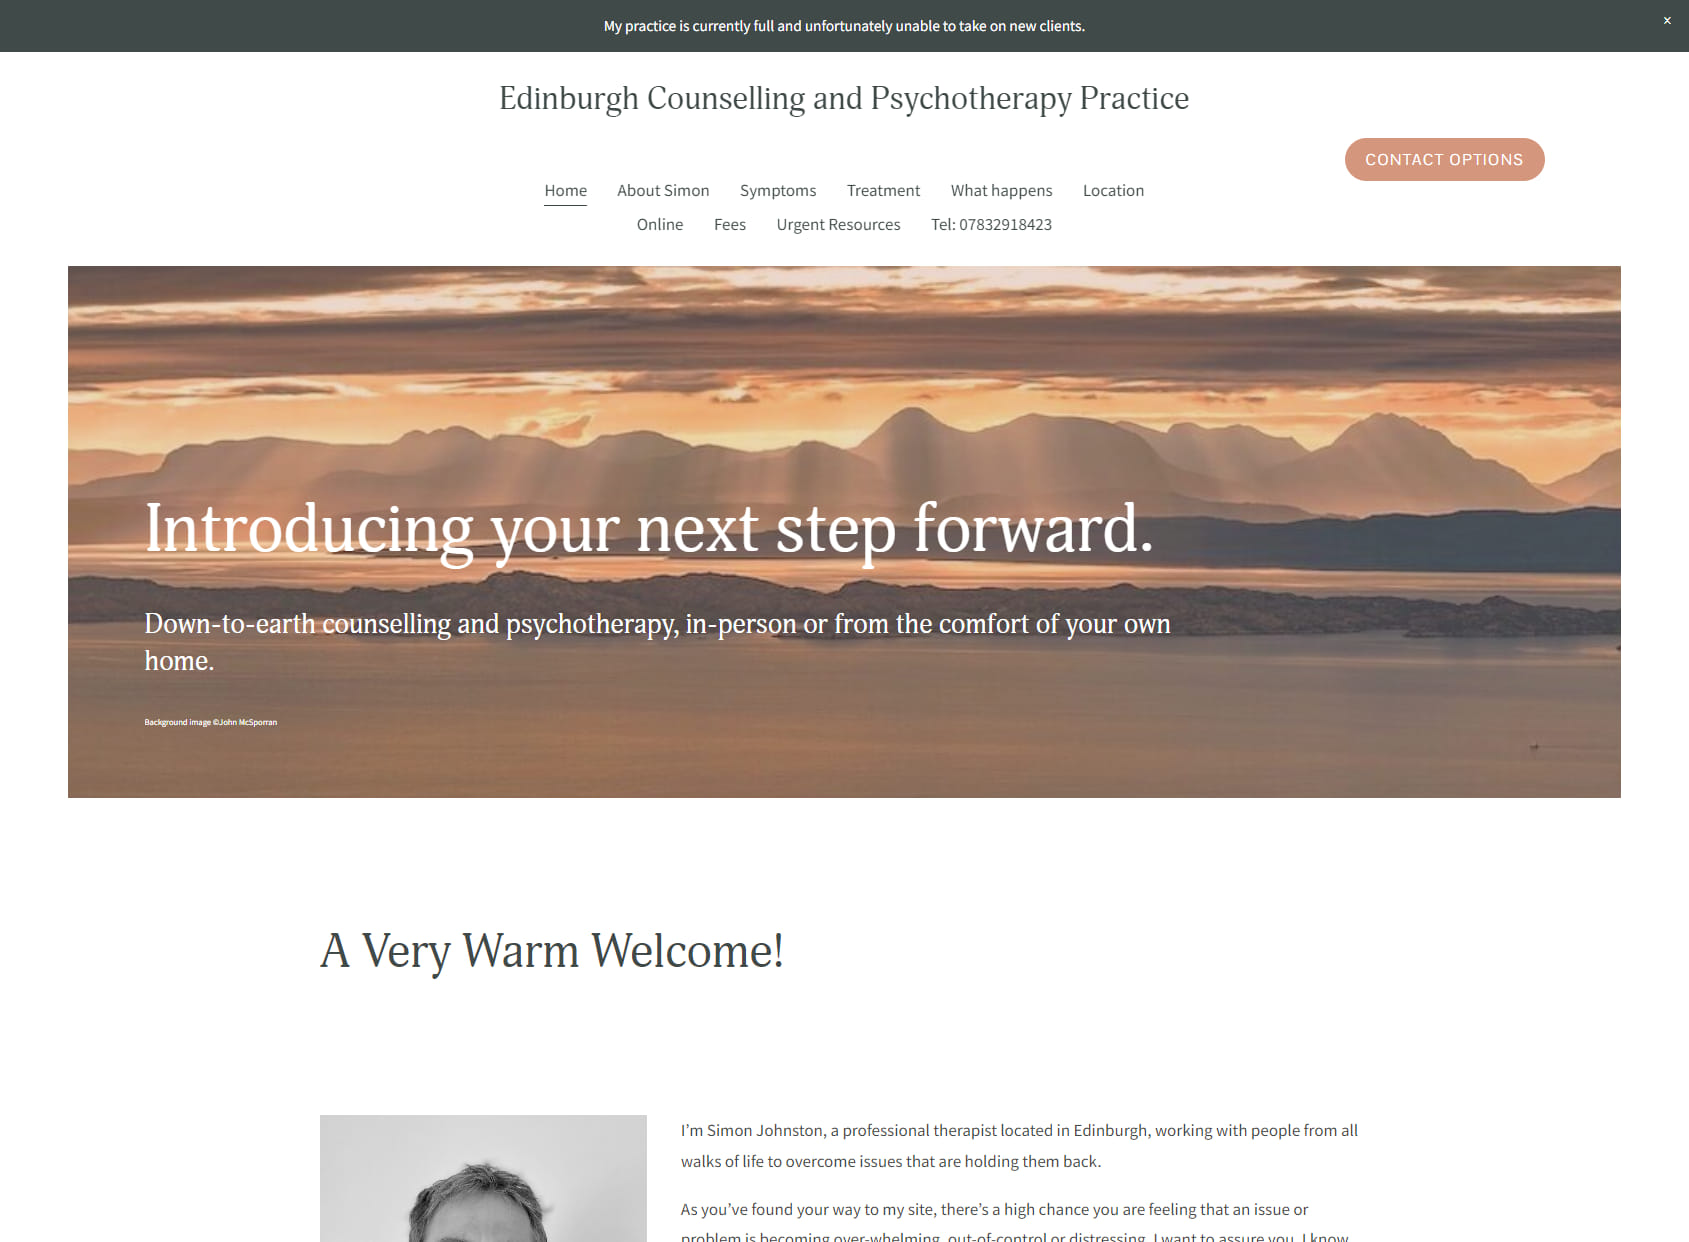 Edinburgh Counselling and Psychotherapy Practice